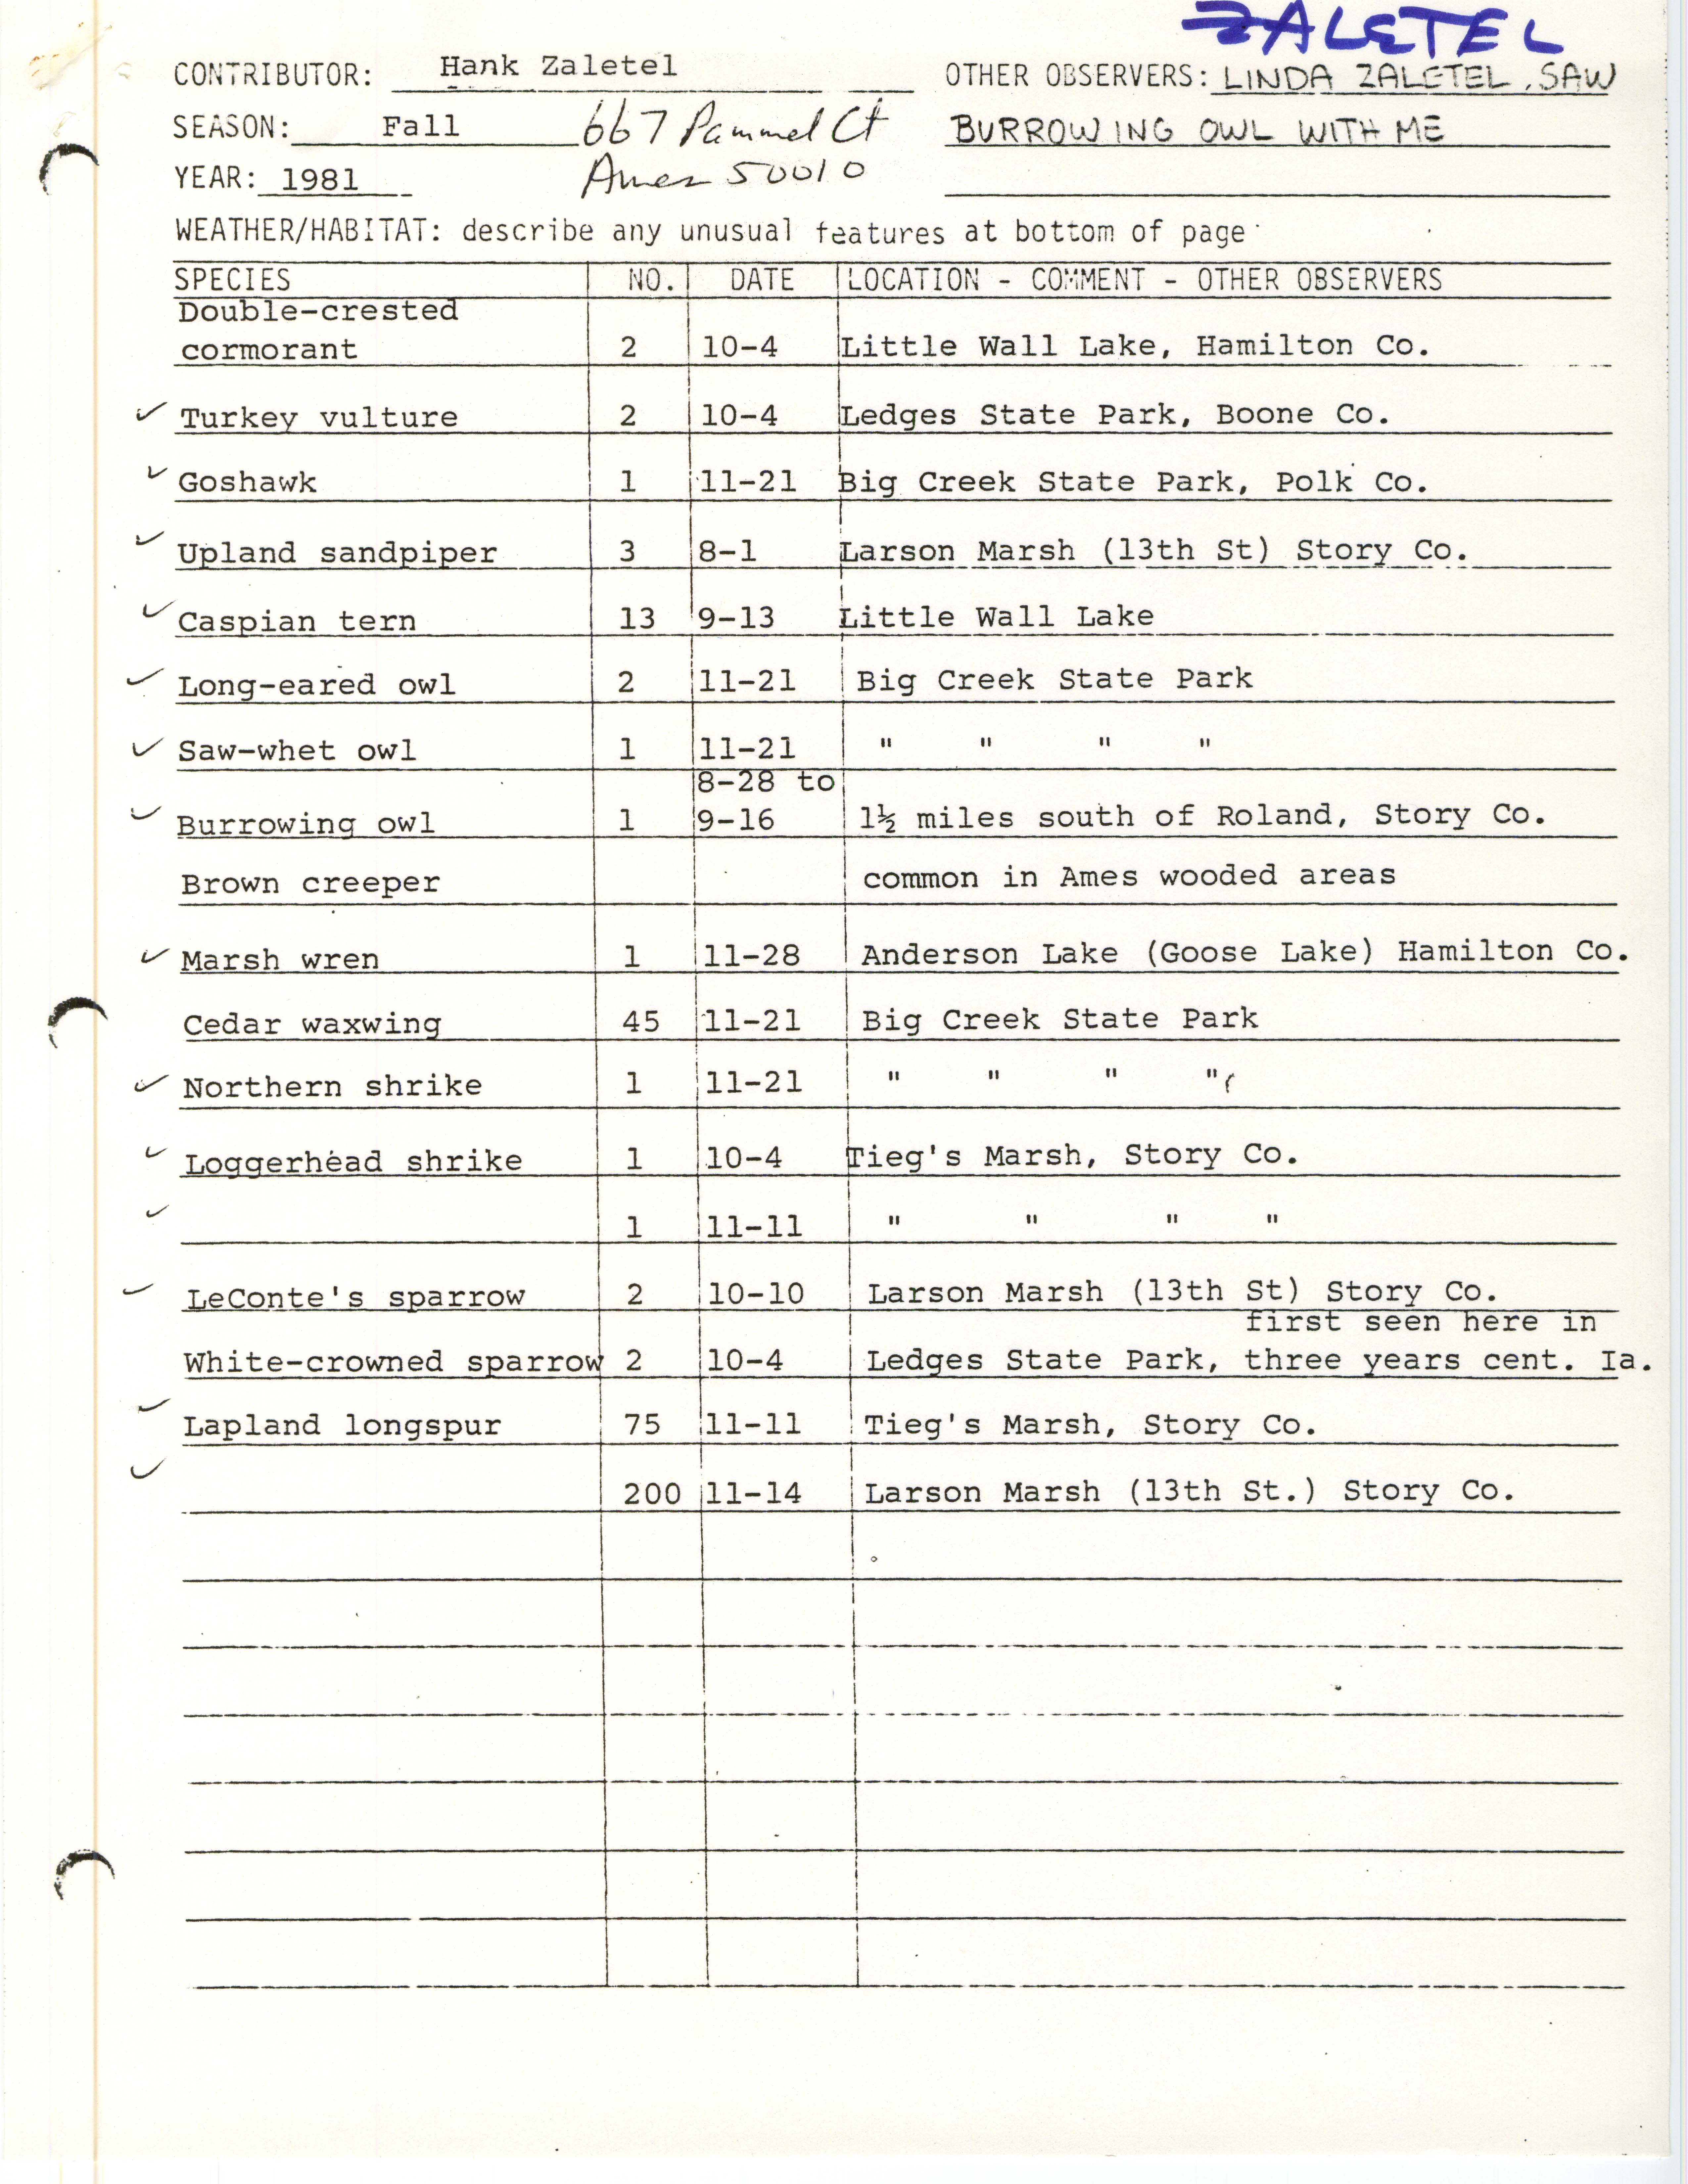 Field notes contributed by Hank Zaletel, fall 1981